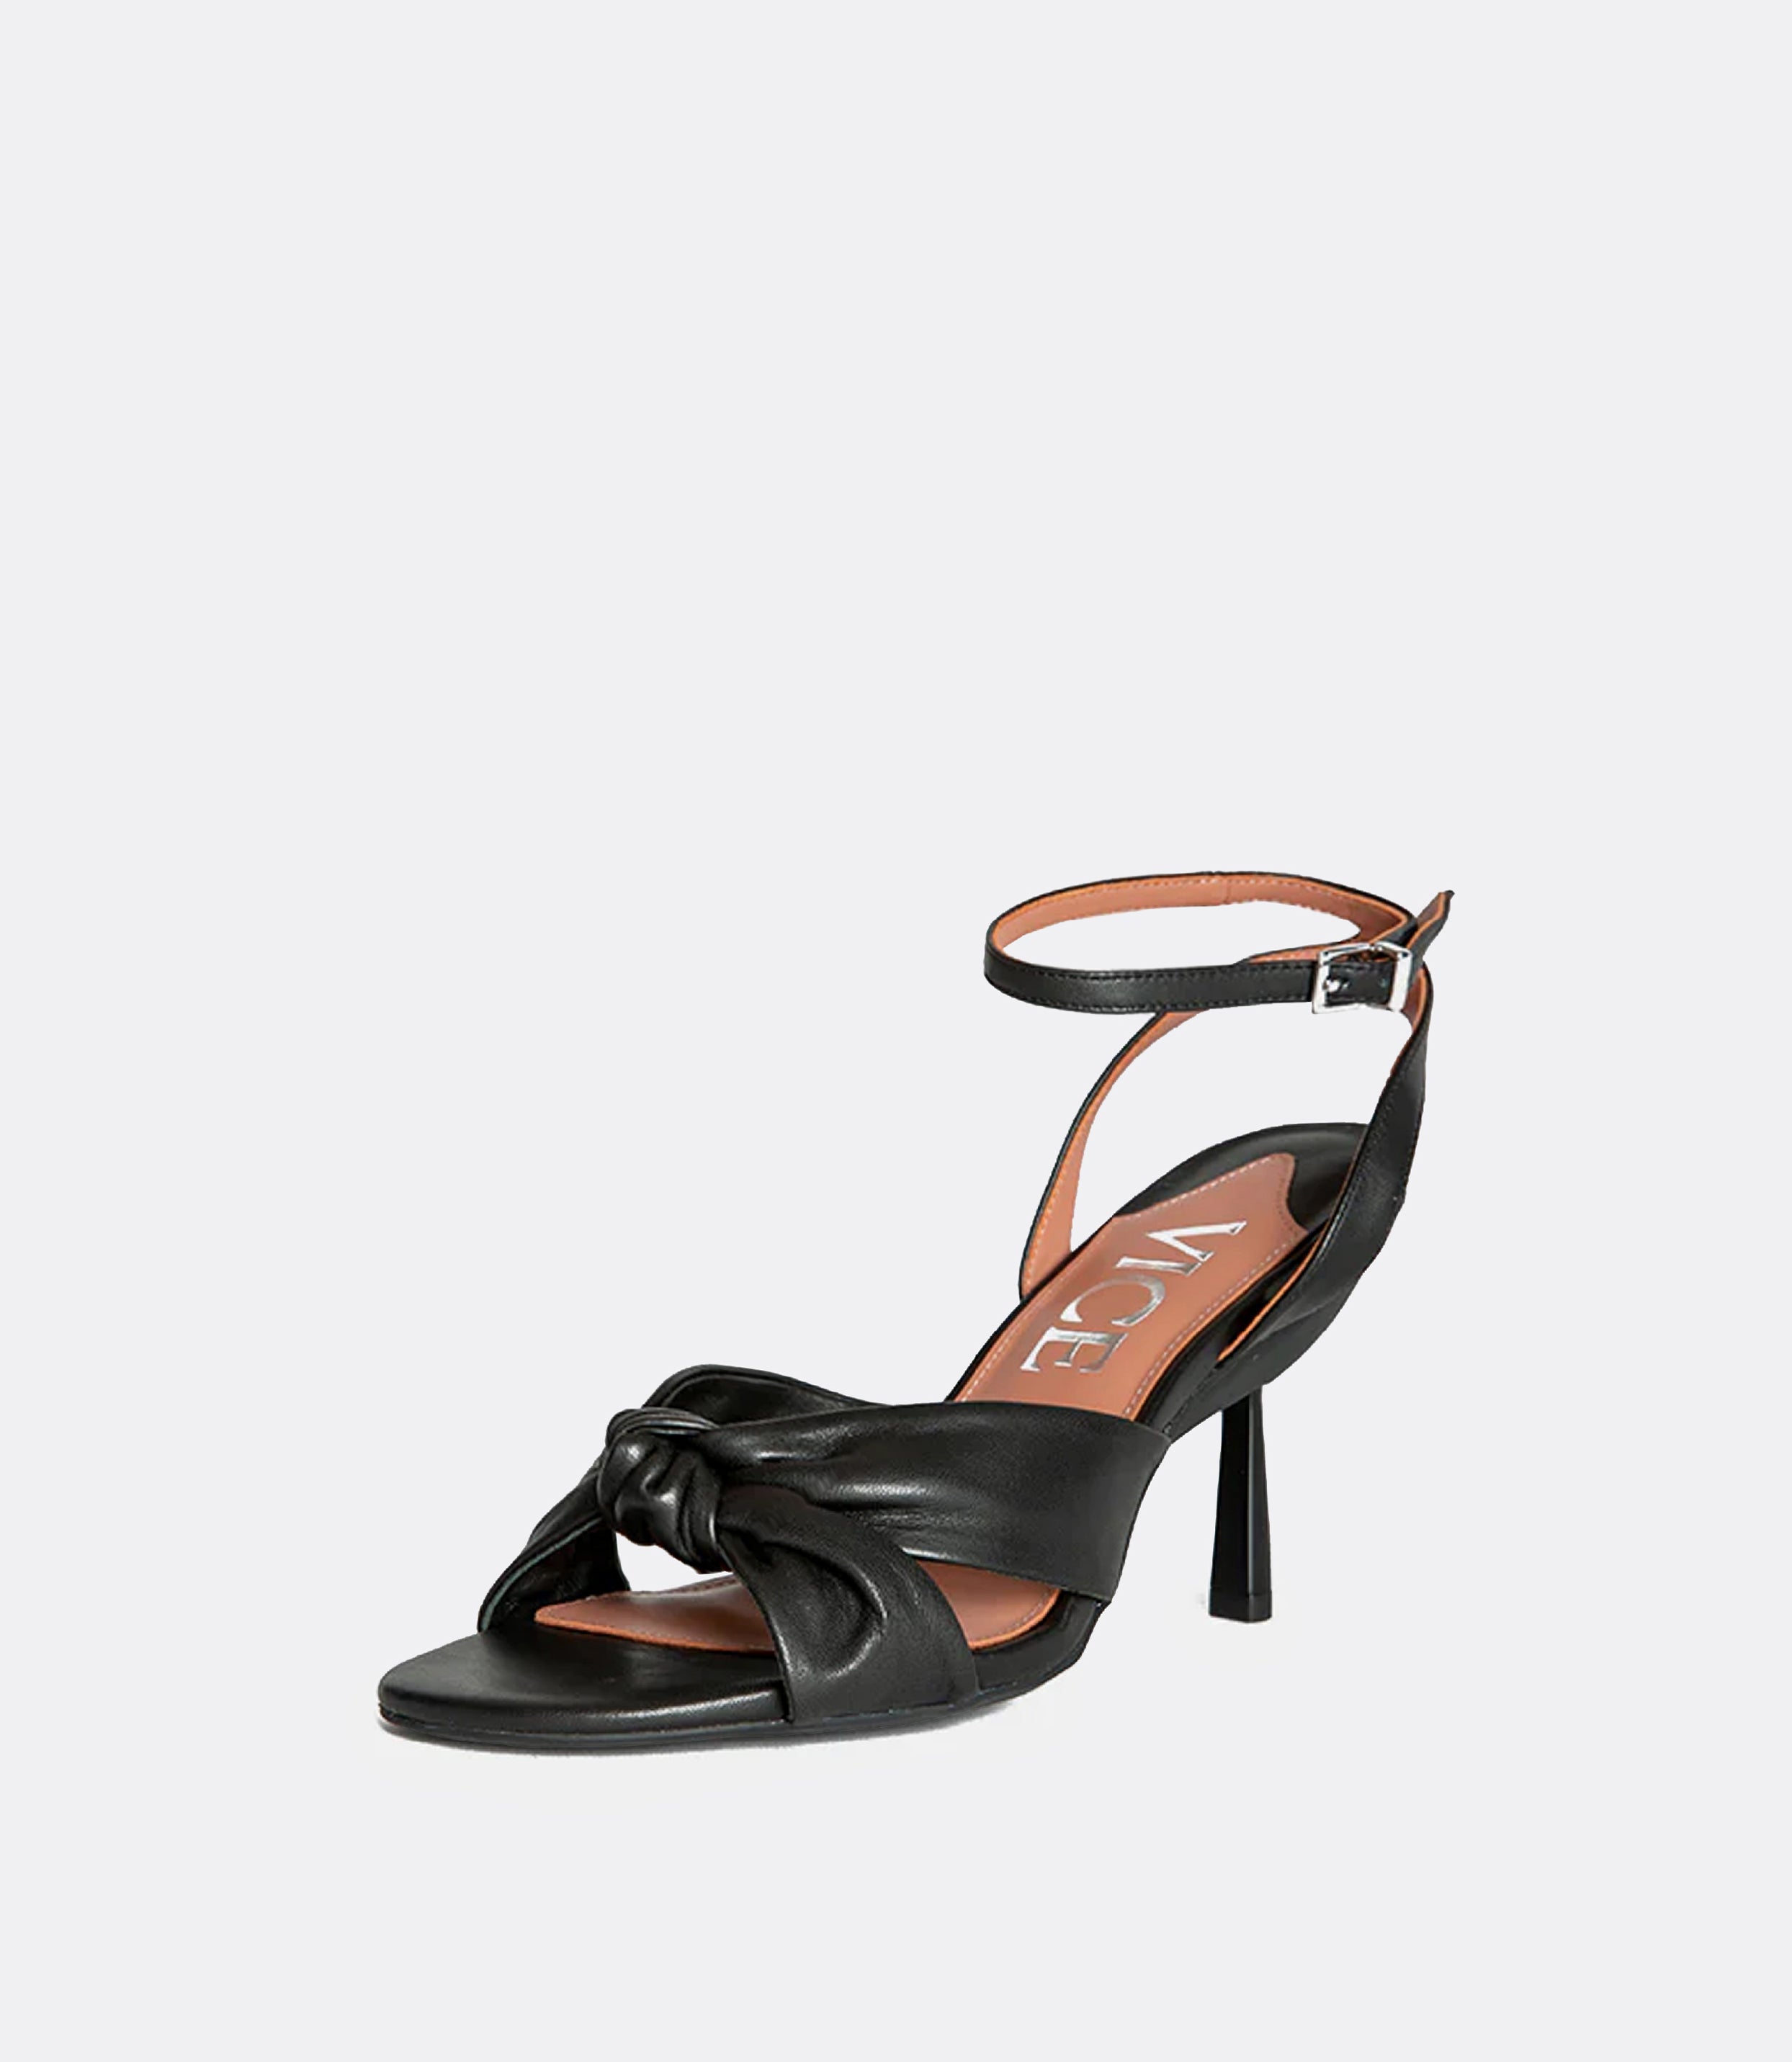 Front view of a black leather sandal as a heel.